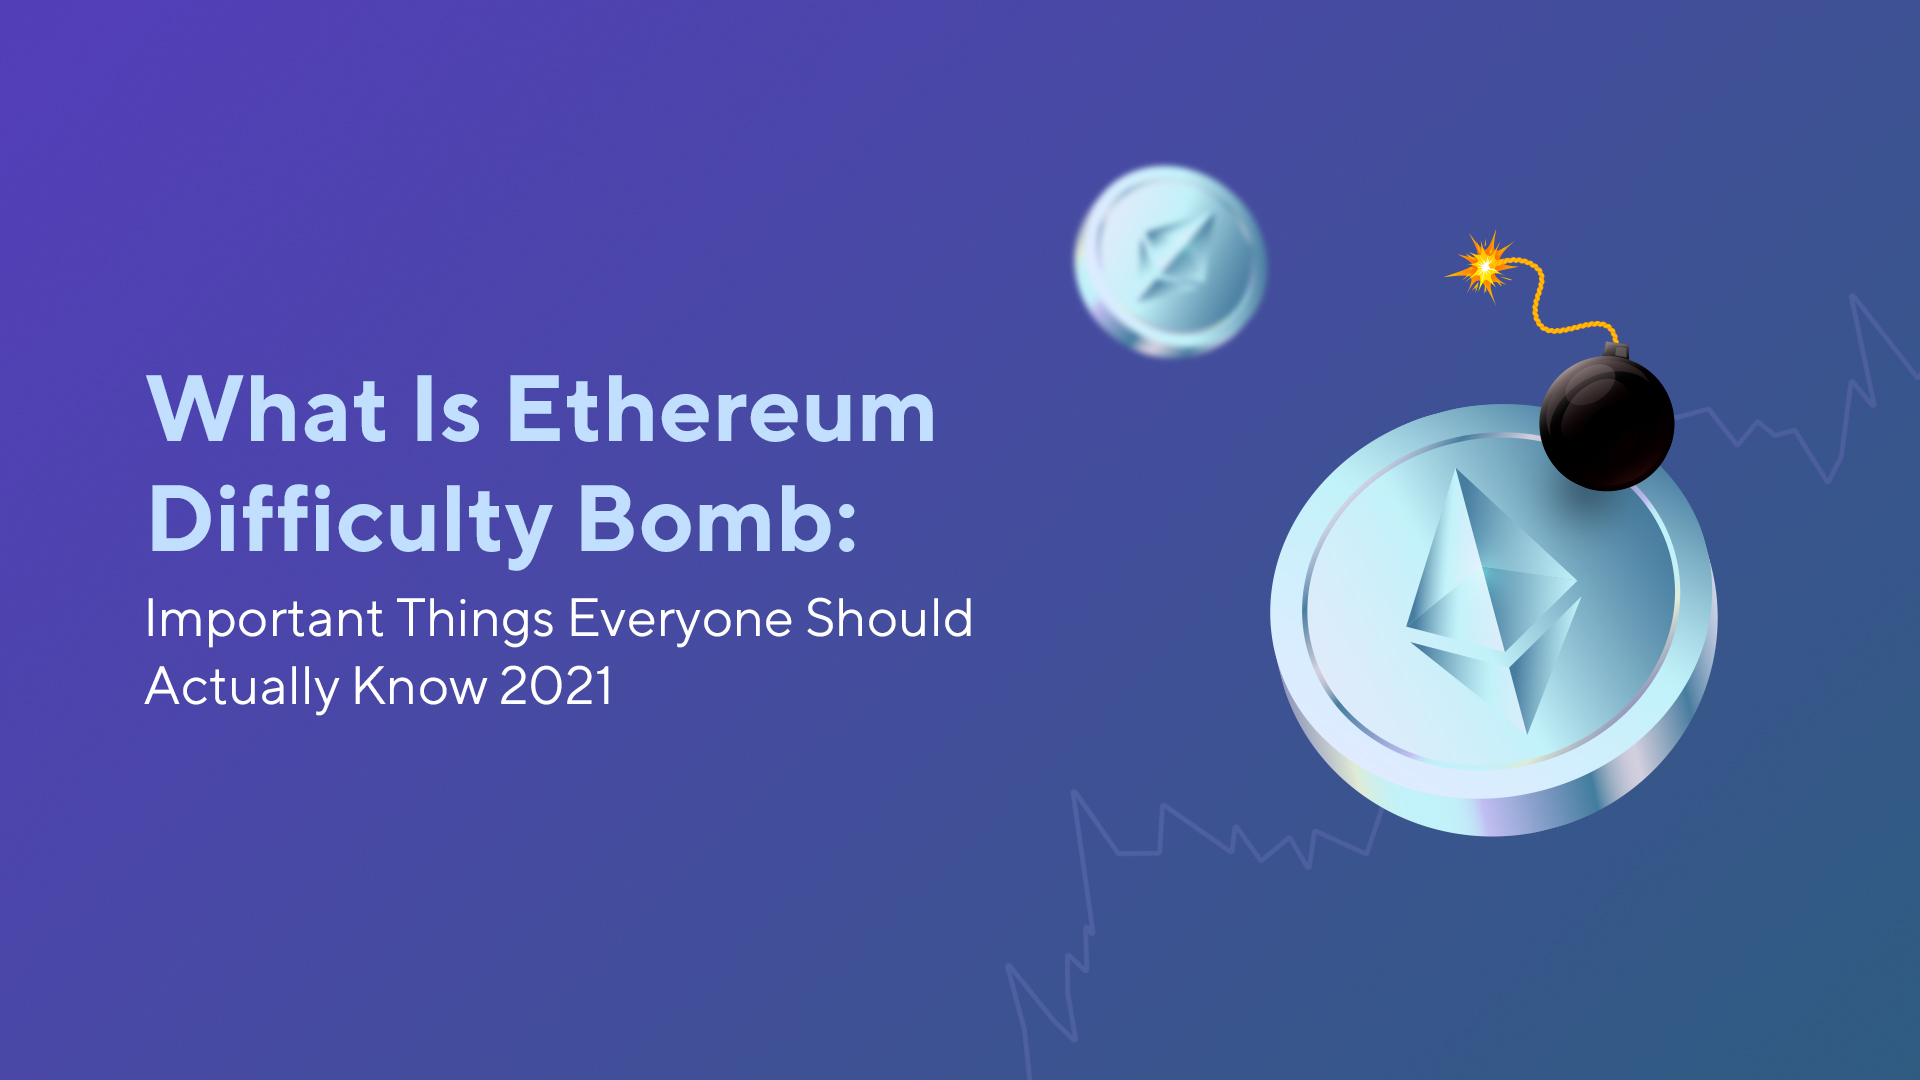 What Is Ethereum Difficulty Bomb: Important Things Everyone Should Actually Know 2021